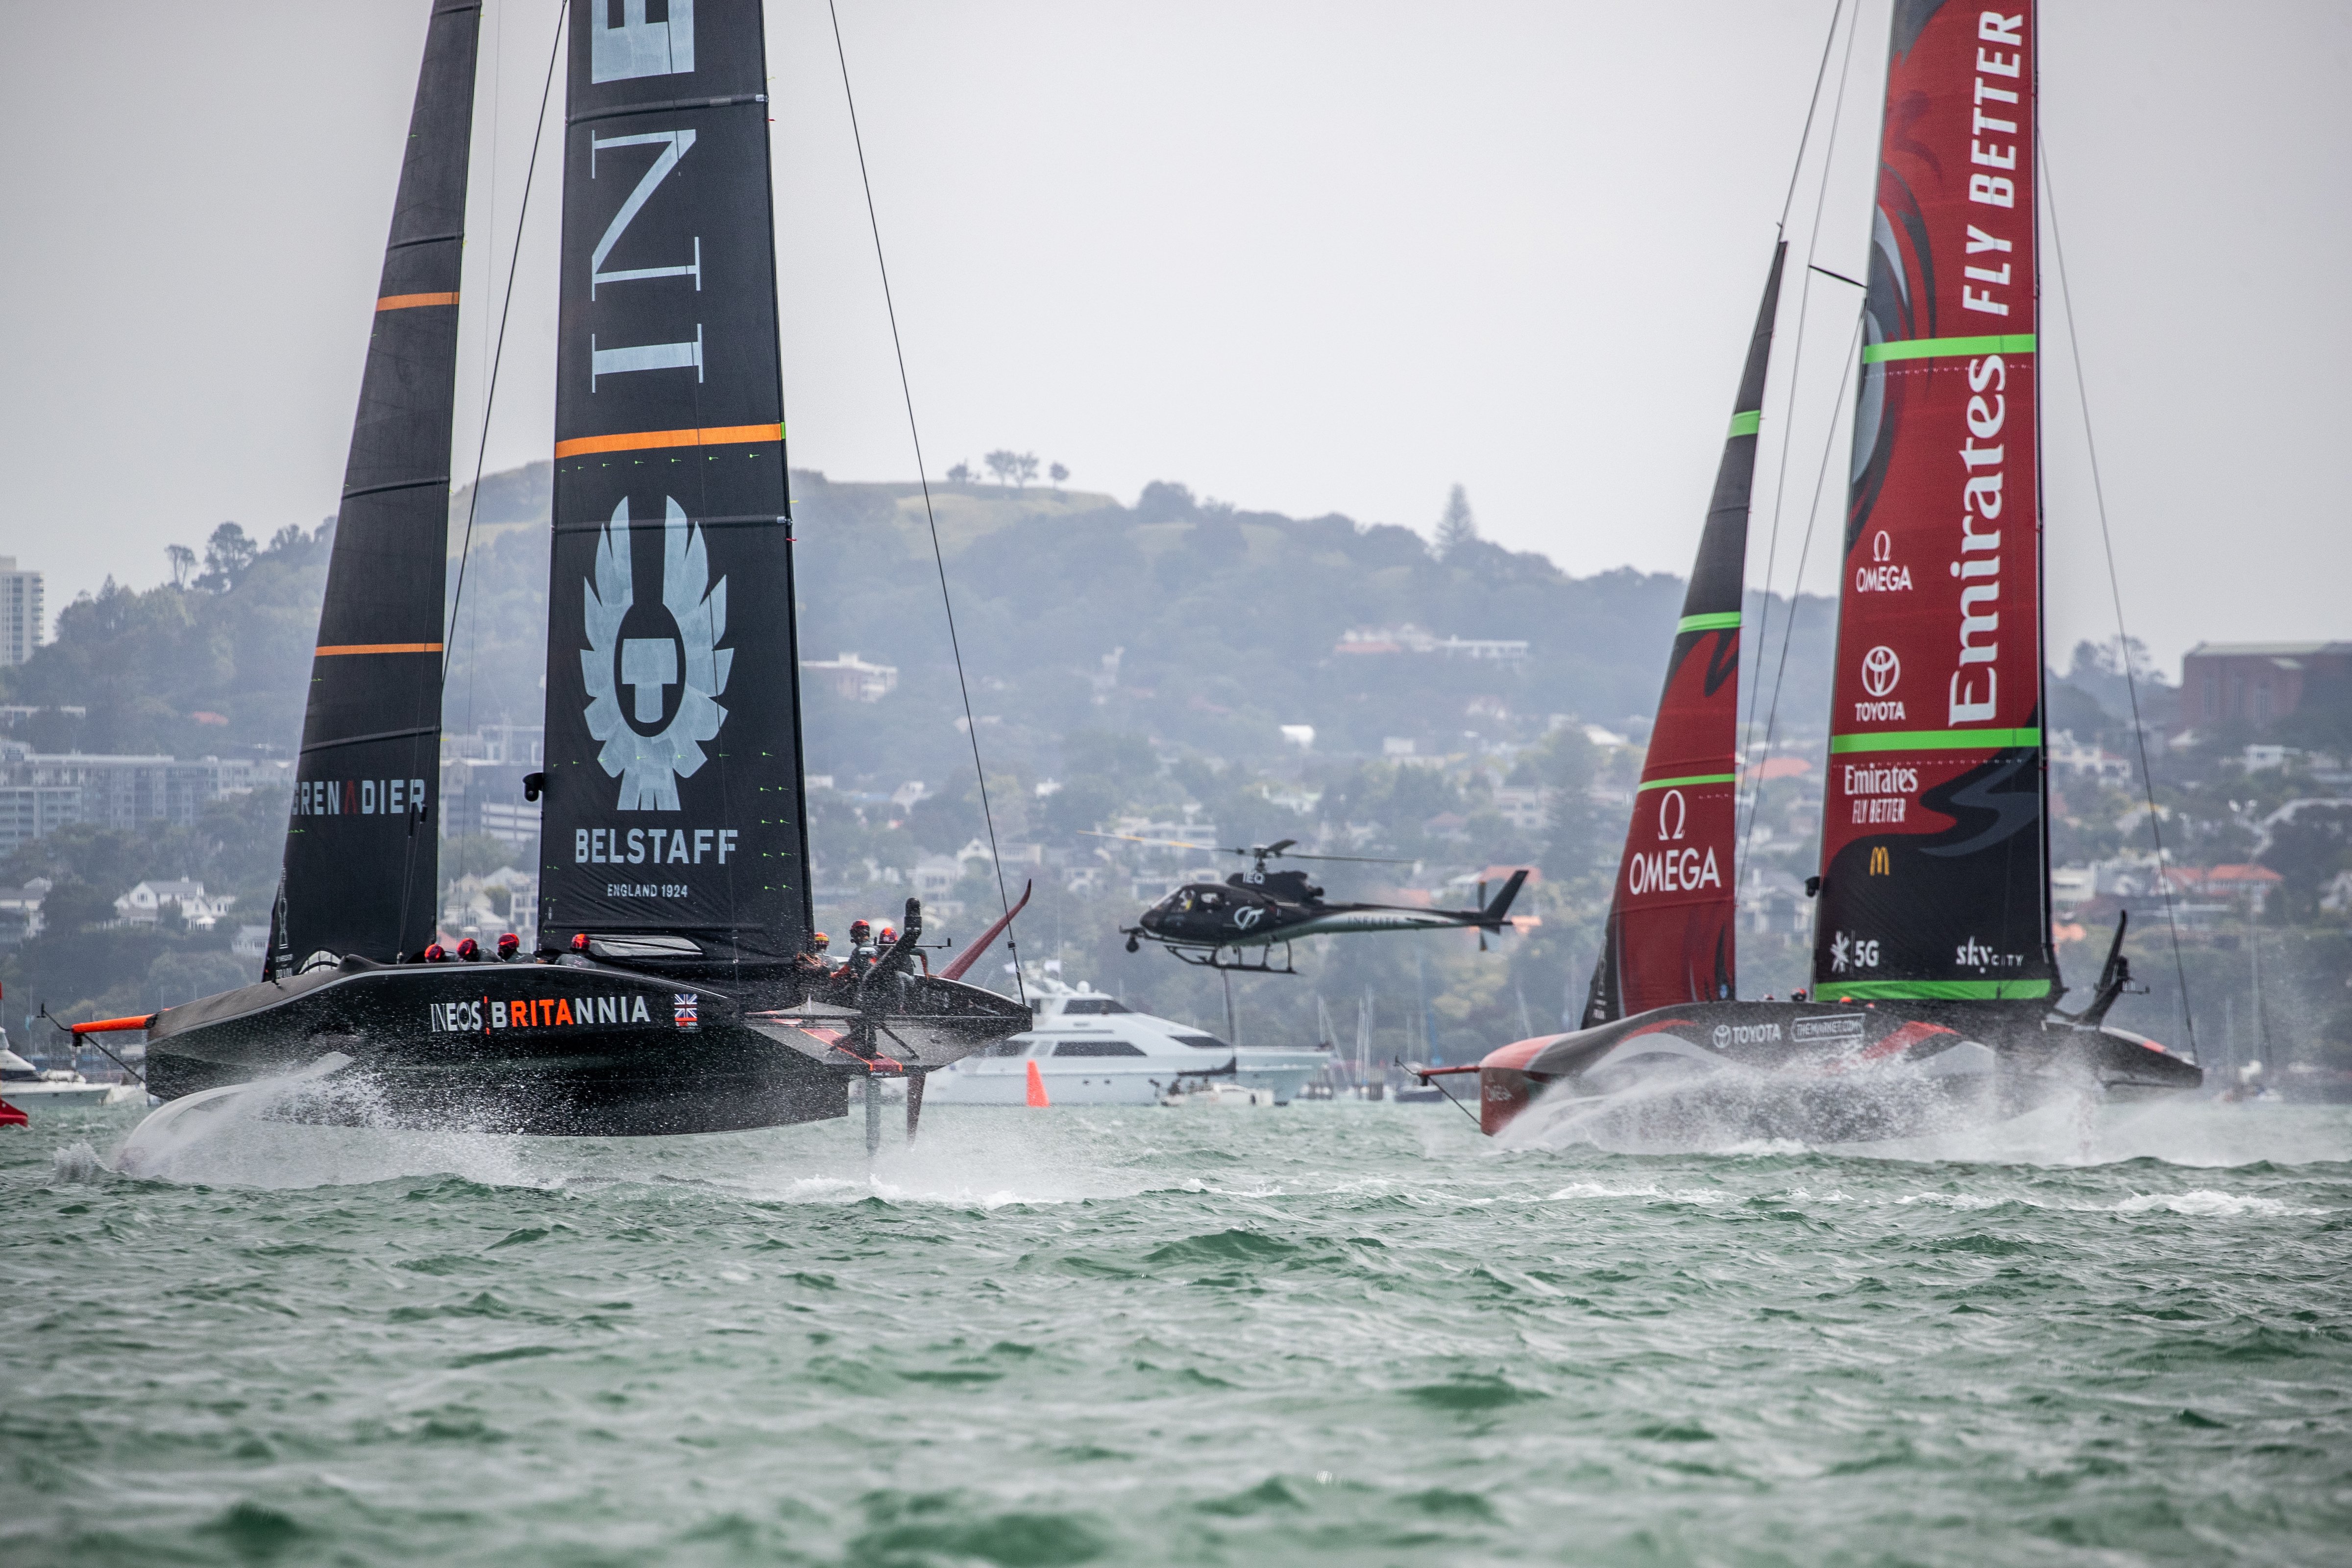 America's Cup: Emirates Team NZ sailing at 50kts - Video and on-board audio